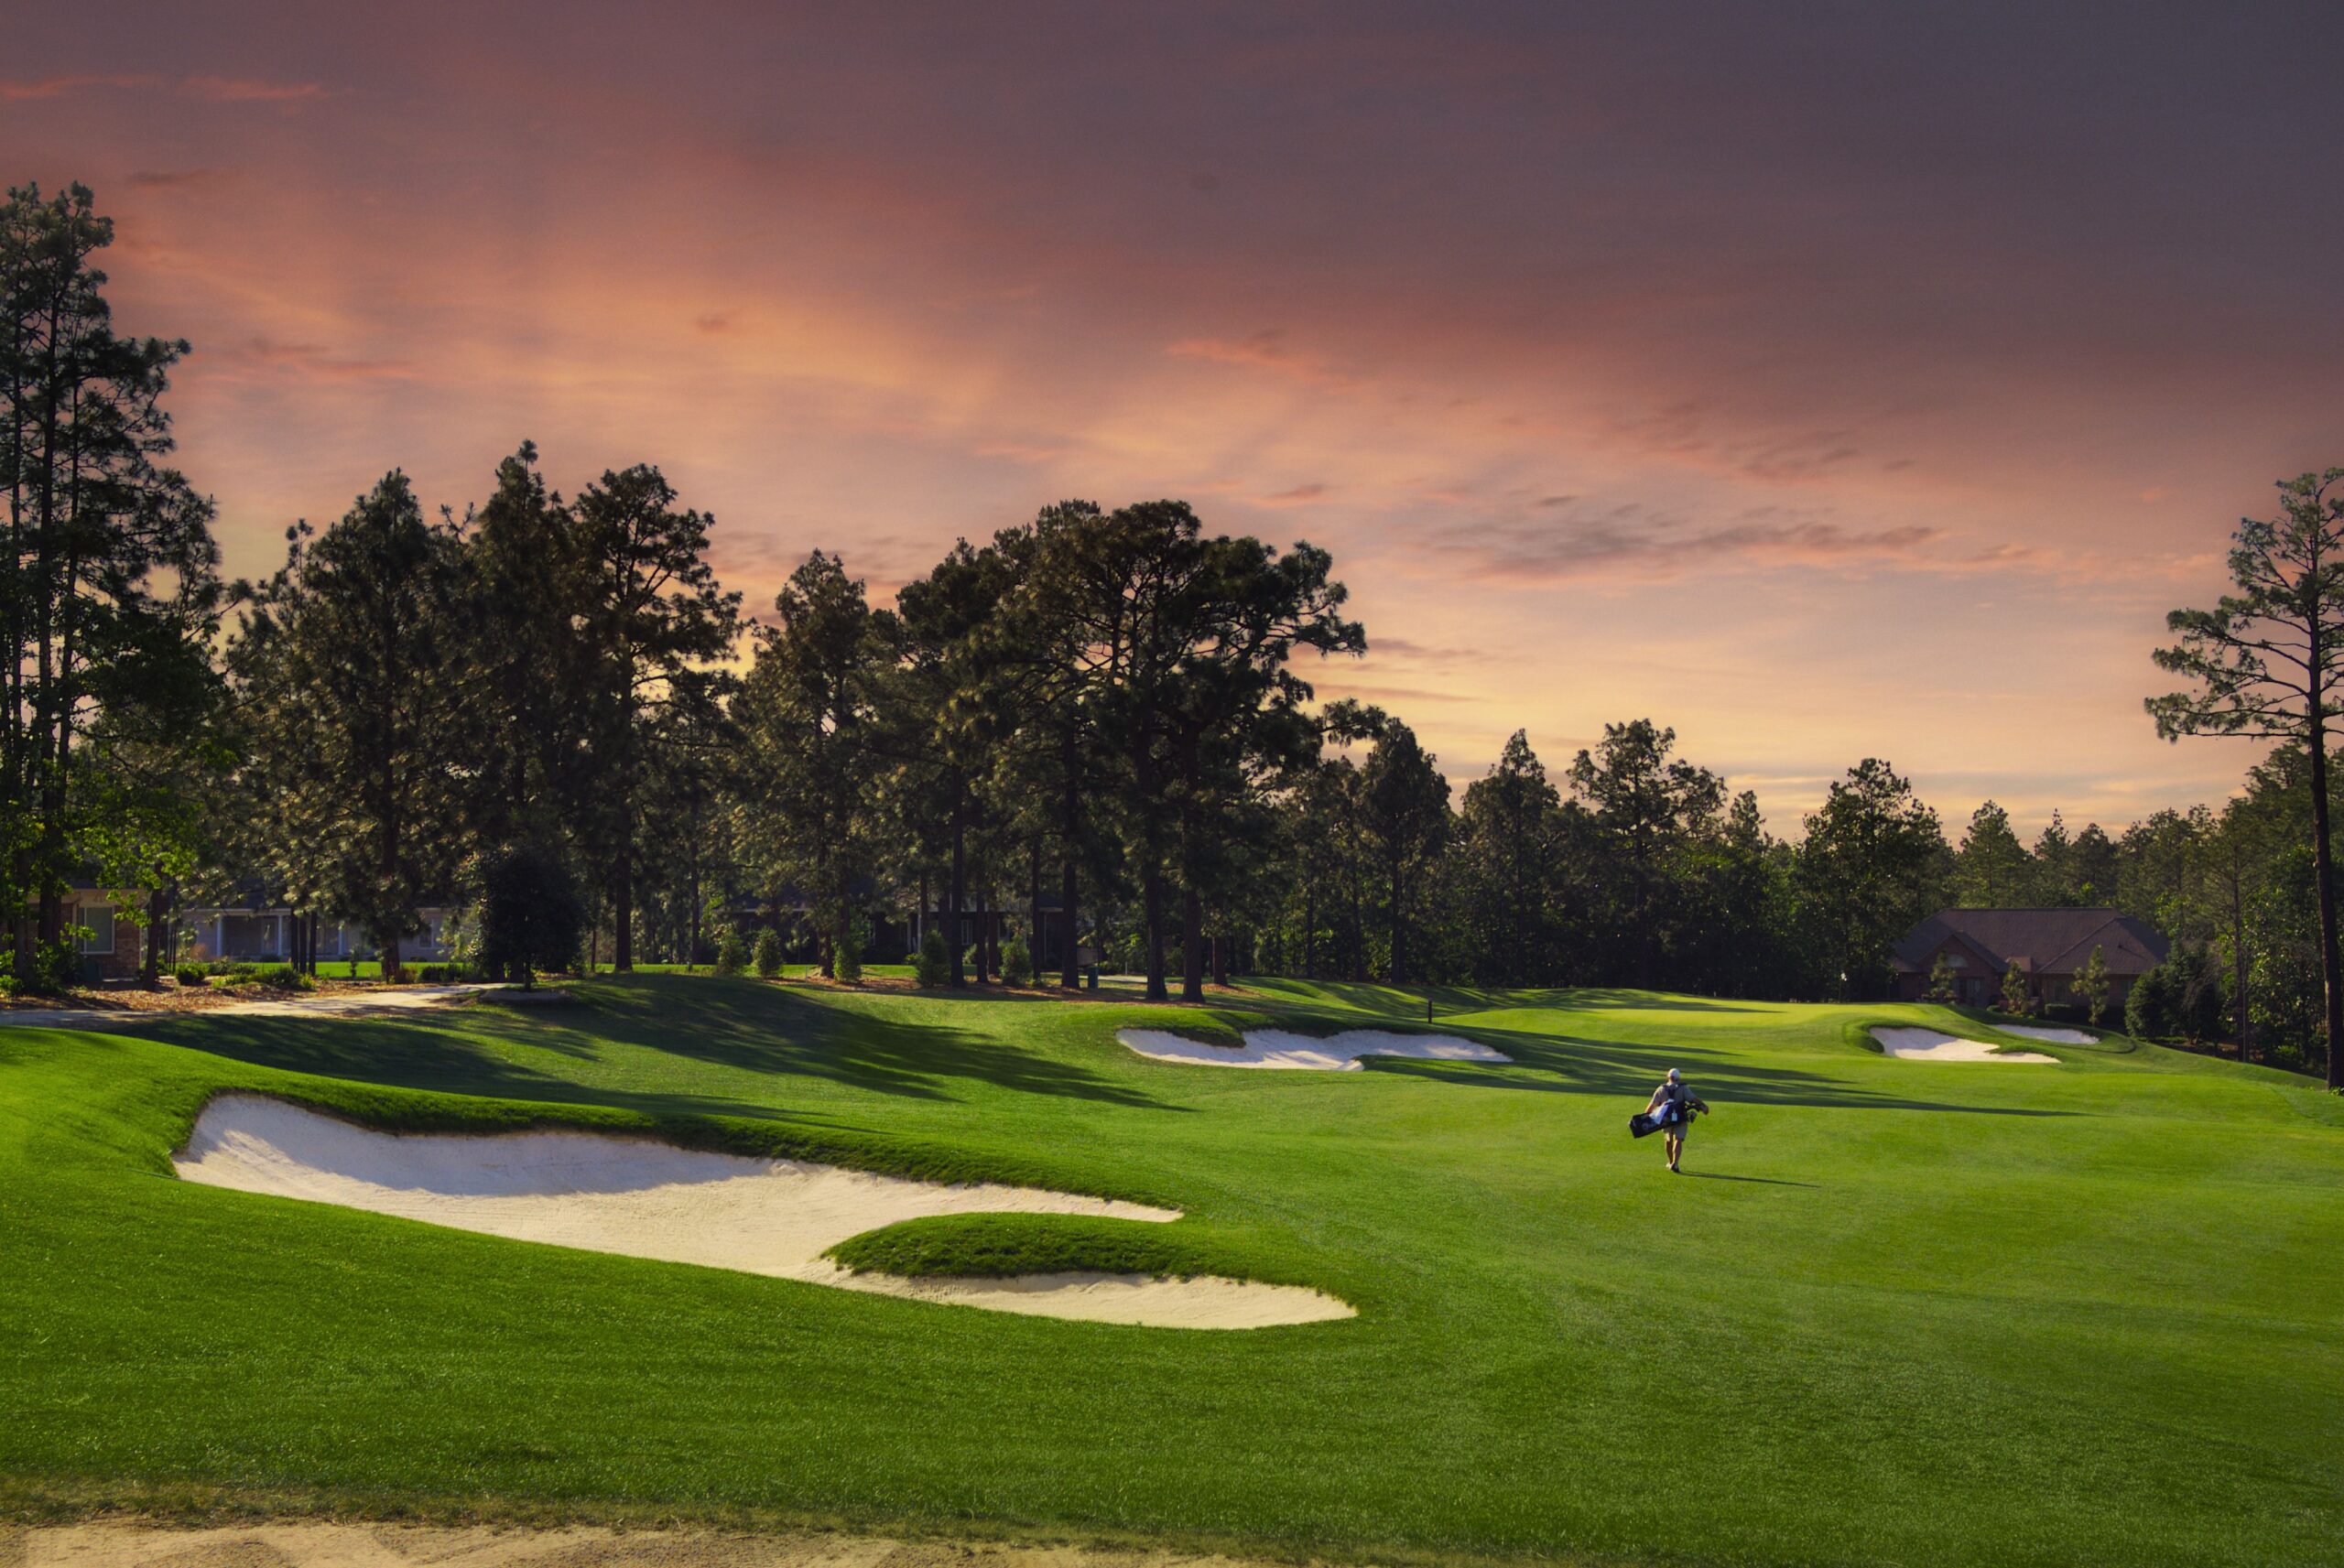 “For me, Pinehurst is such a special place for golf!”- Tom Fazio